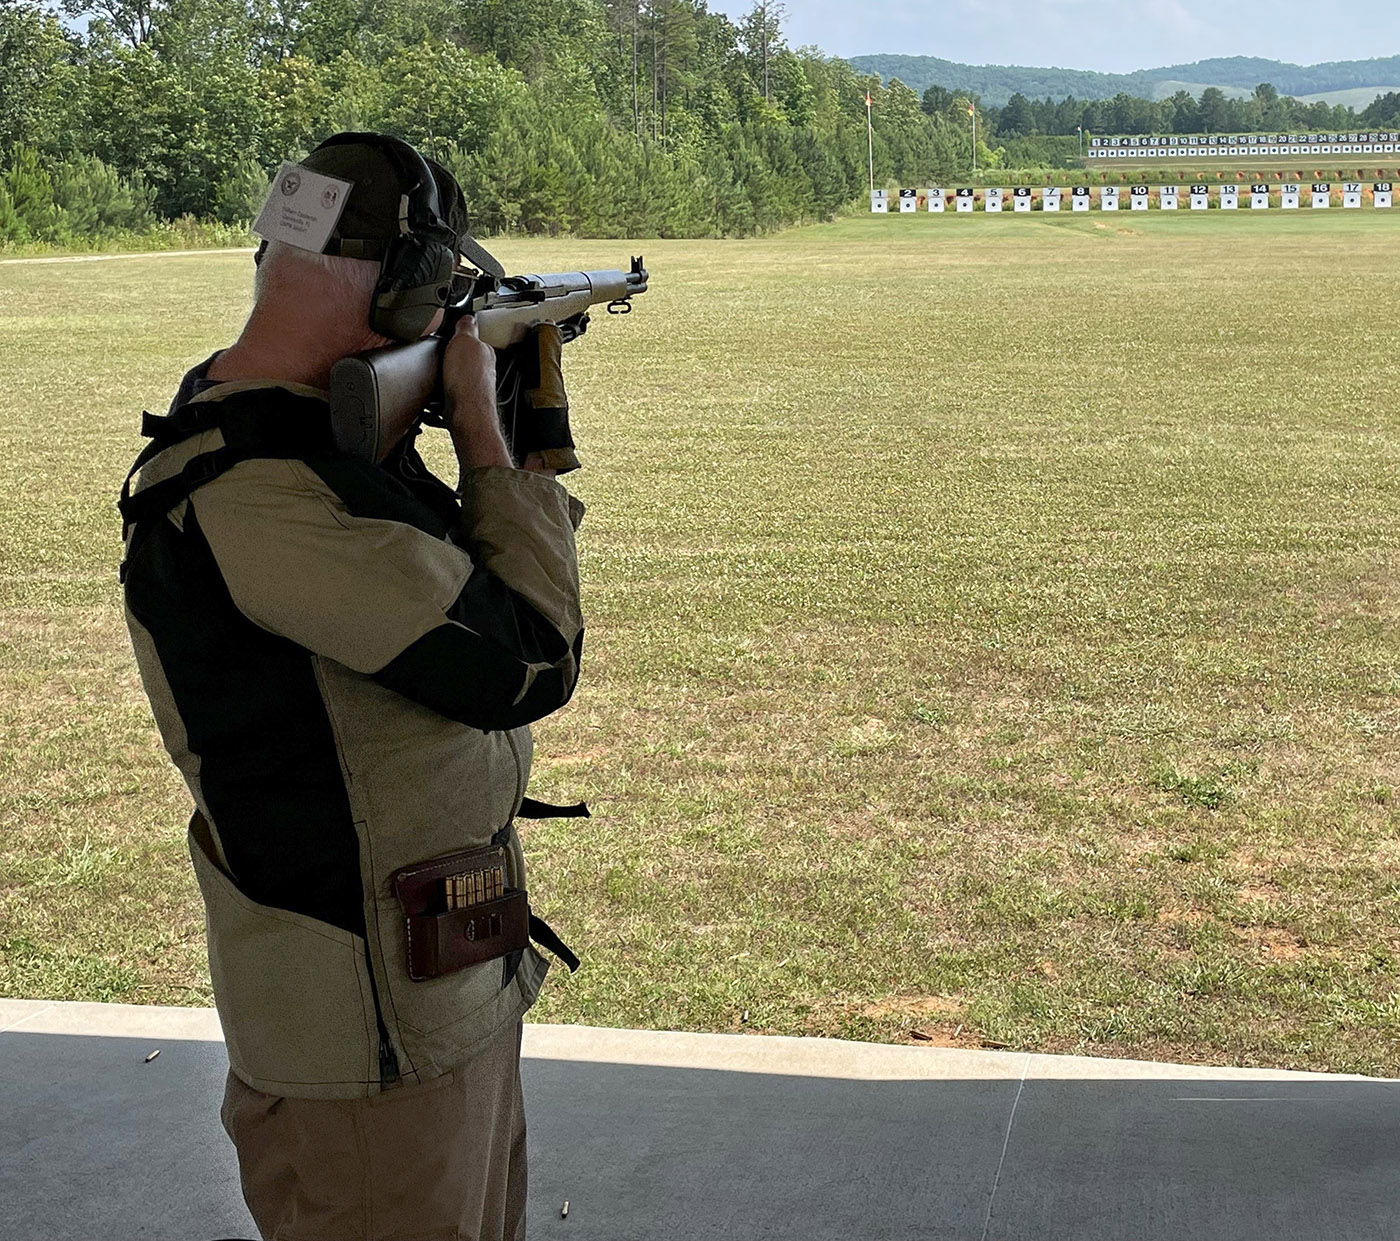 Shooting offhand at one of the Garand/Springfield matches.  A poor offhand score relegated me to the land of bronze medals and a placement of 54th out of 116.